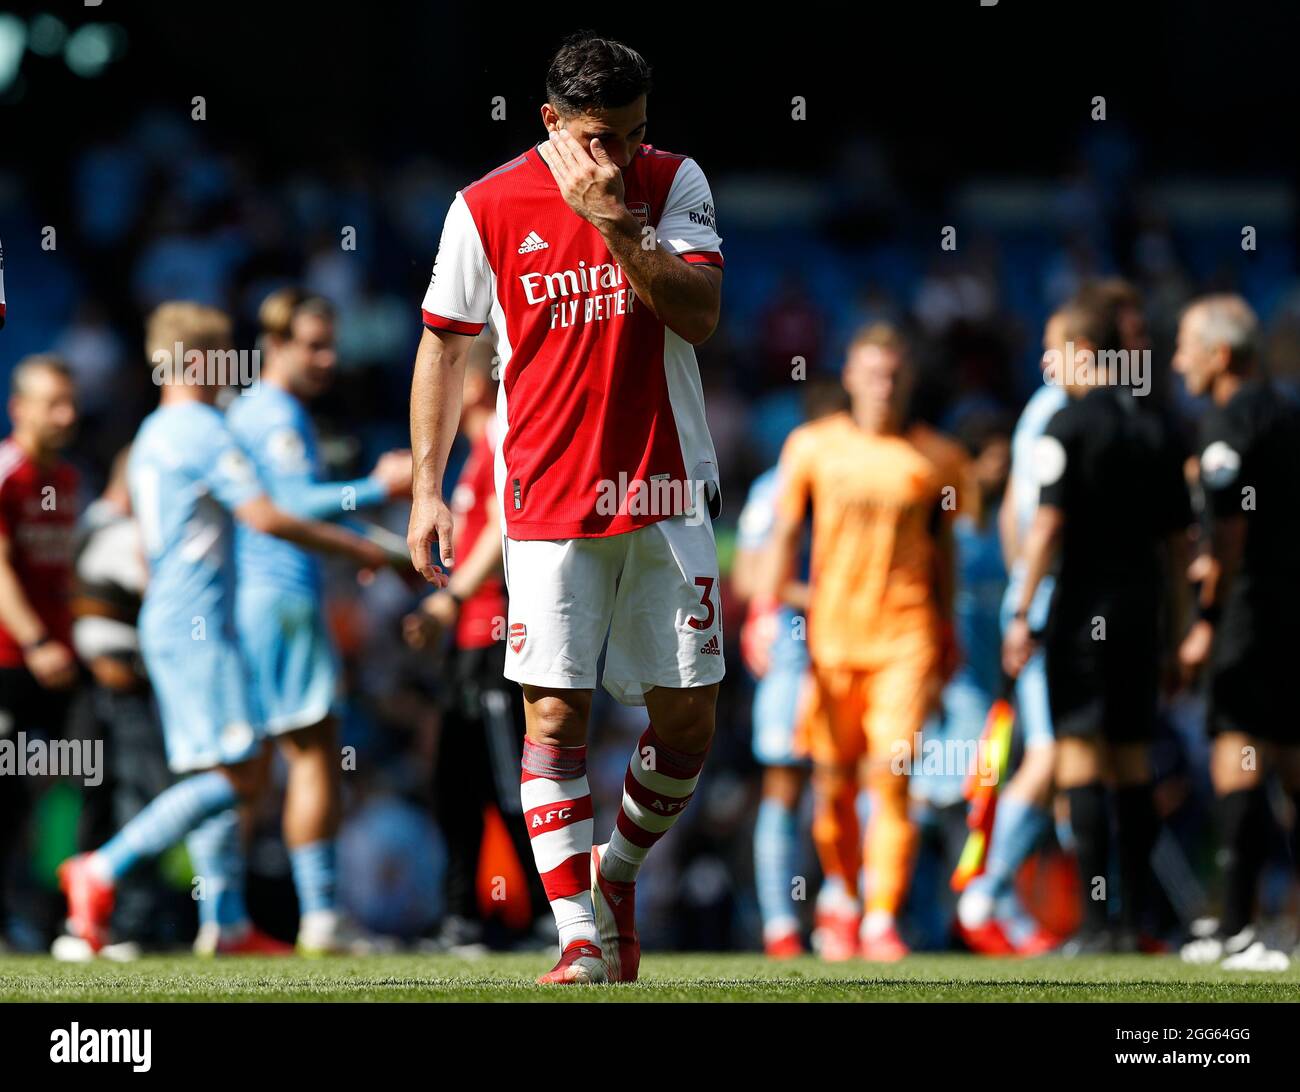 Manchester, England, 28th August 2021.  Sead Kolasinac of Arsenal reacts after the Premier League match at the Etihad Stadium, Manchester. Picture credit should read: Darren Staples / Sportimage Stock Photo